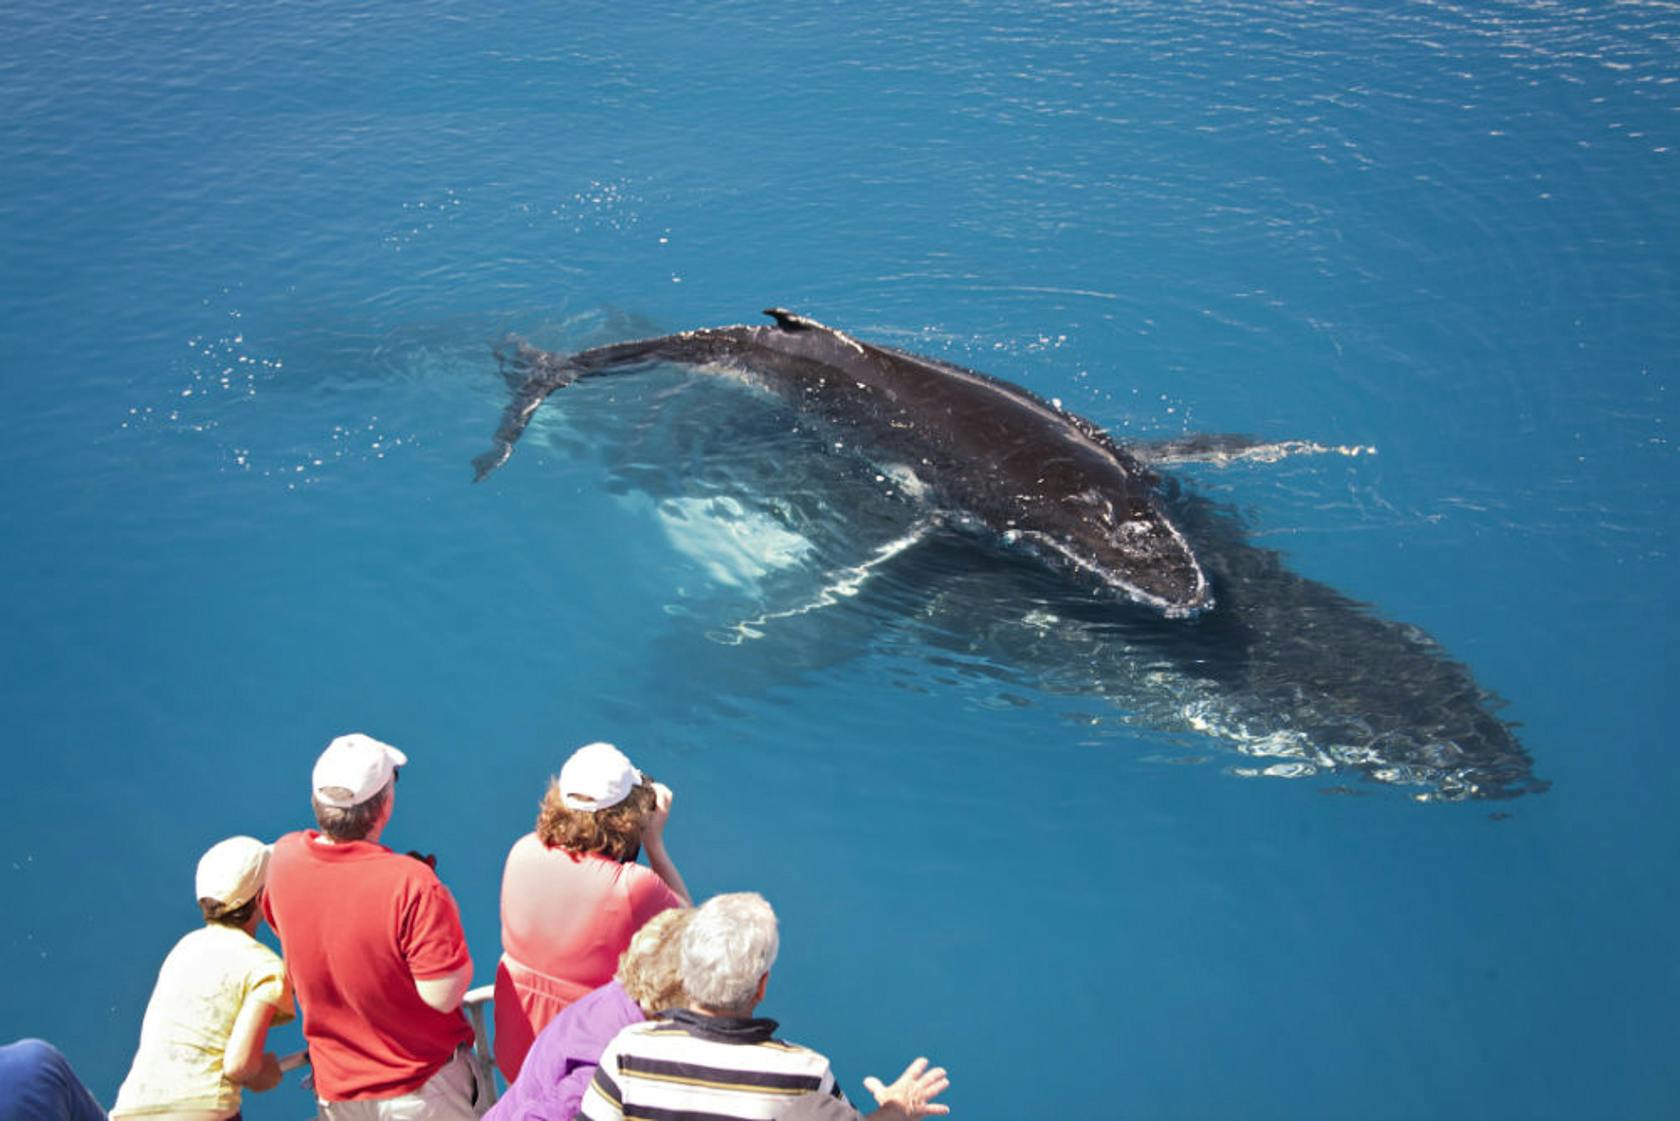 Hervey Bay is the whale watching capital of Australia